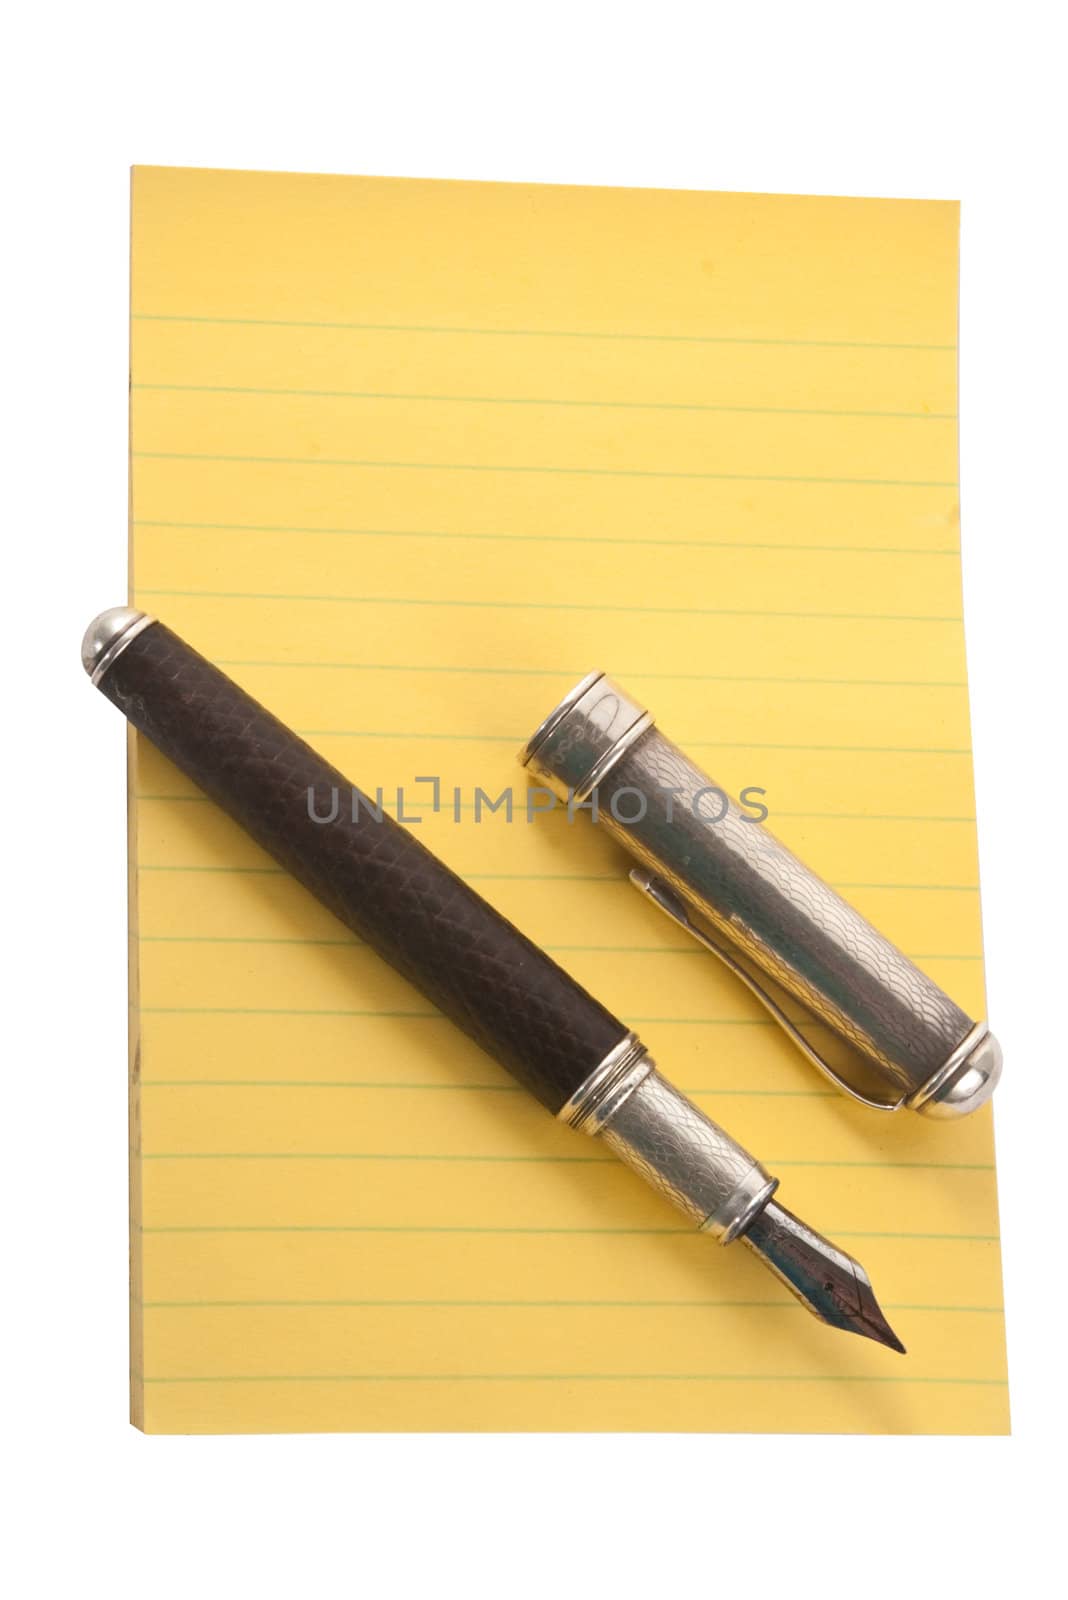 Yellow notepad with fountain pen, isolated on white background